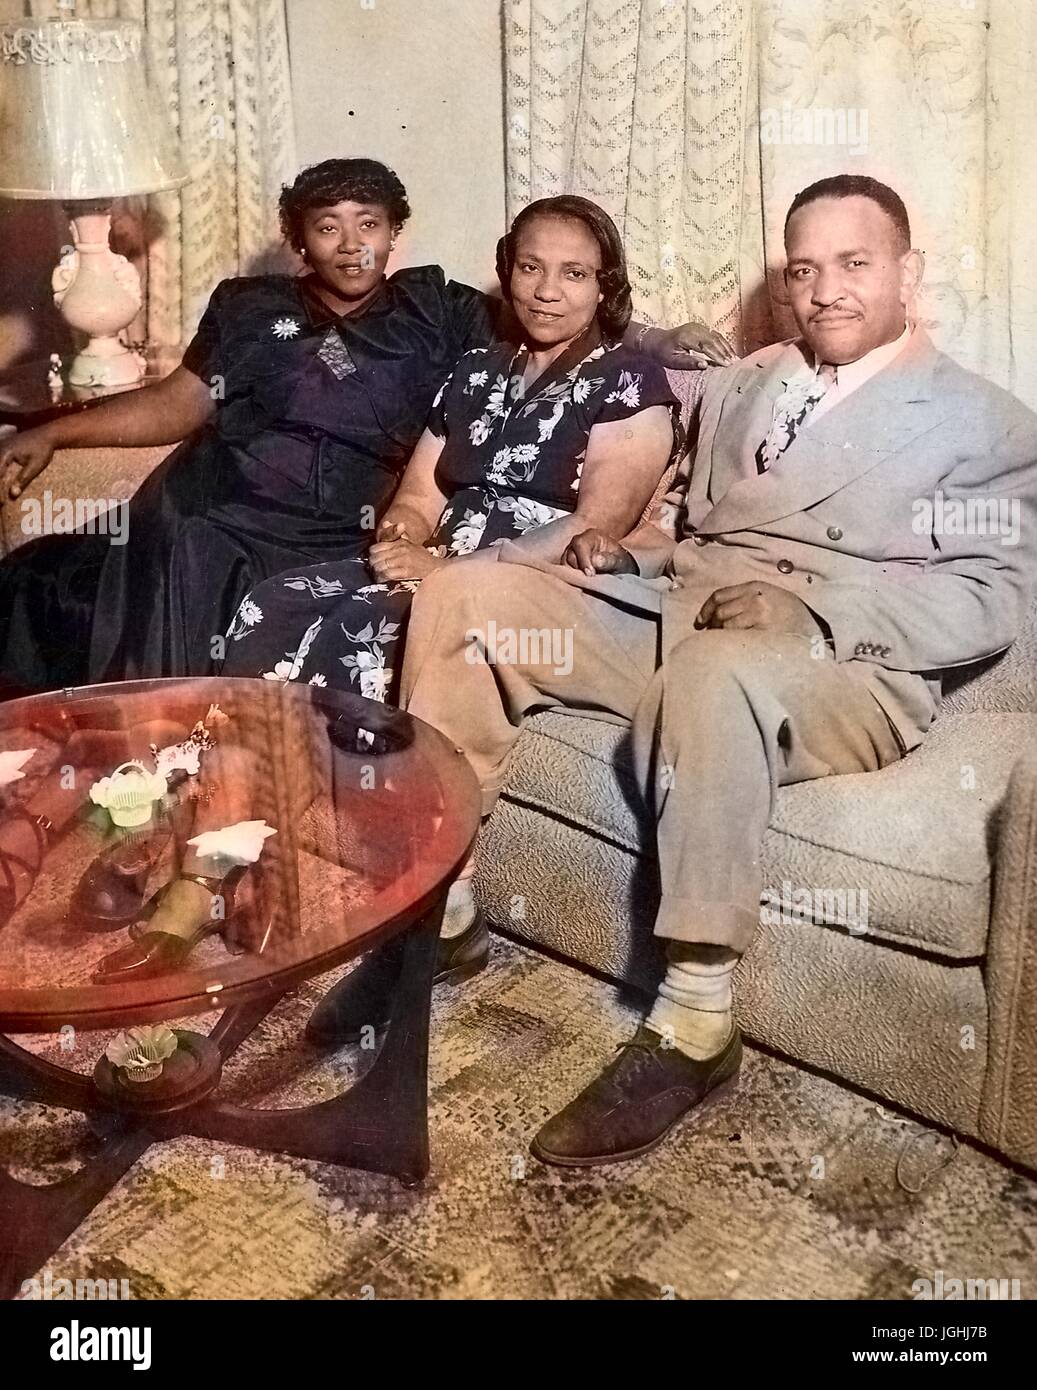 African-American family, father, daughter, and mother sitting on a couch in their home, glass coffee table with figurines visible in the foreground, a lamp and curtains in the background, 1960. Note: Image has been digitally colorized using a modern process. Colors may not be period-accurate. Stock Photo